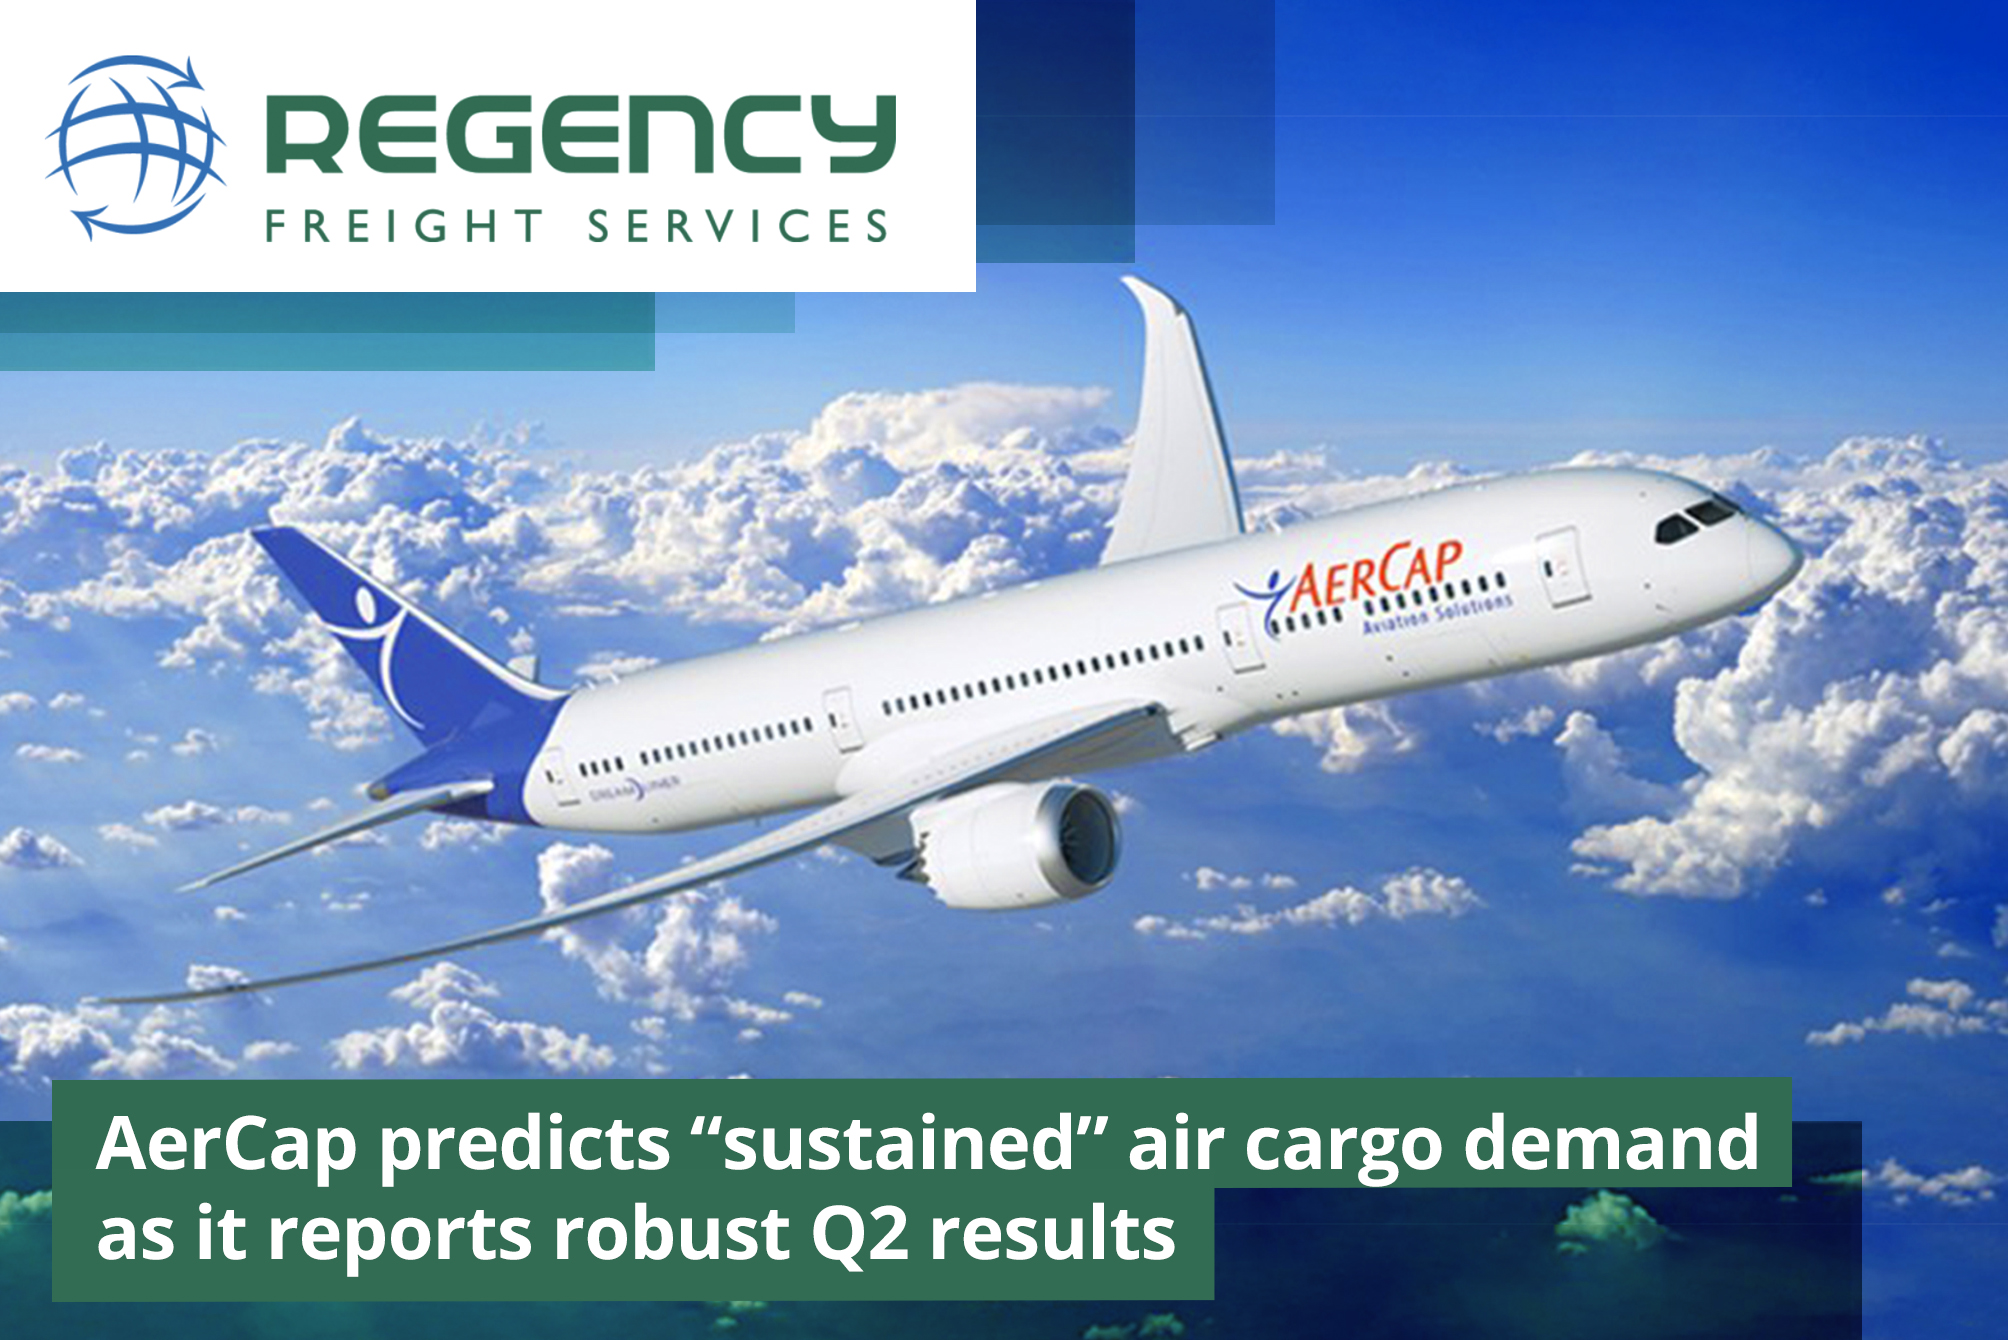 AerCap predicted sustained air cargo demand as it reports robust Q2 results